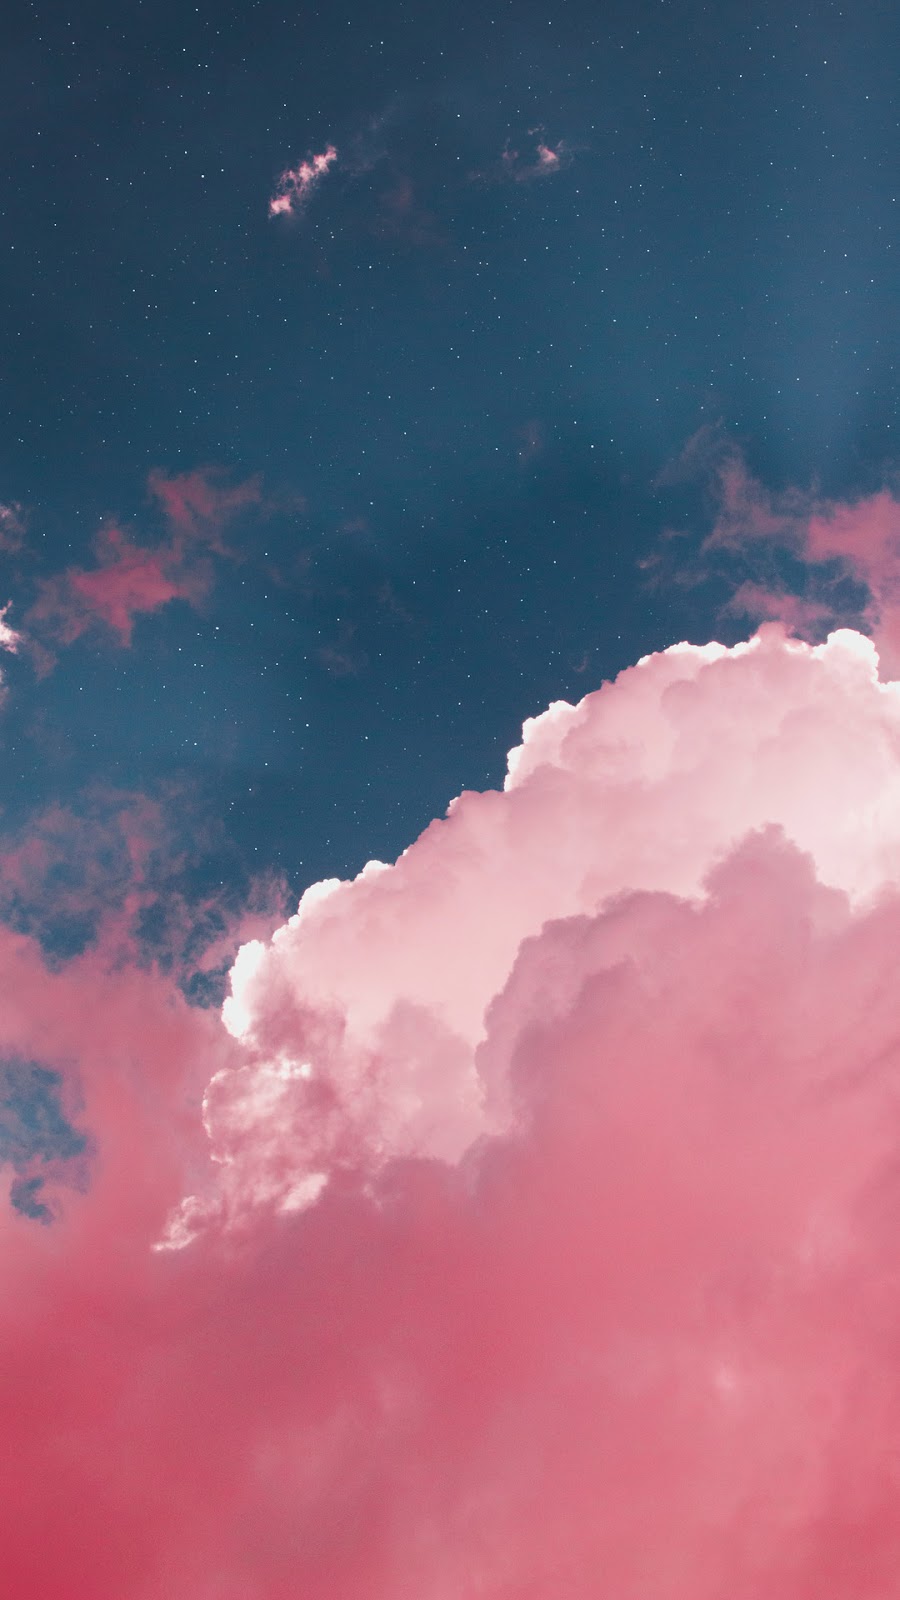 Aesthetic Pink Clouds Wallpaper and HD Background free download on PicGaGa